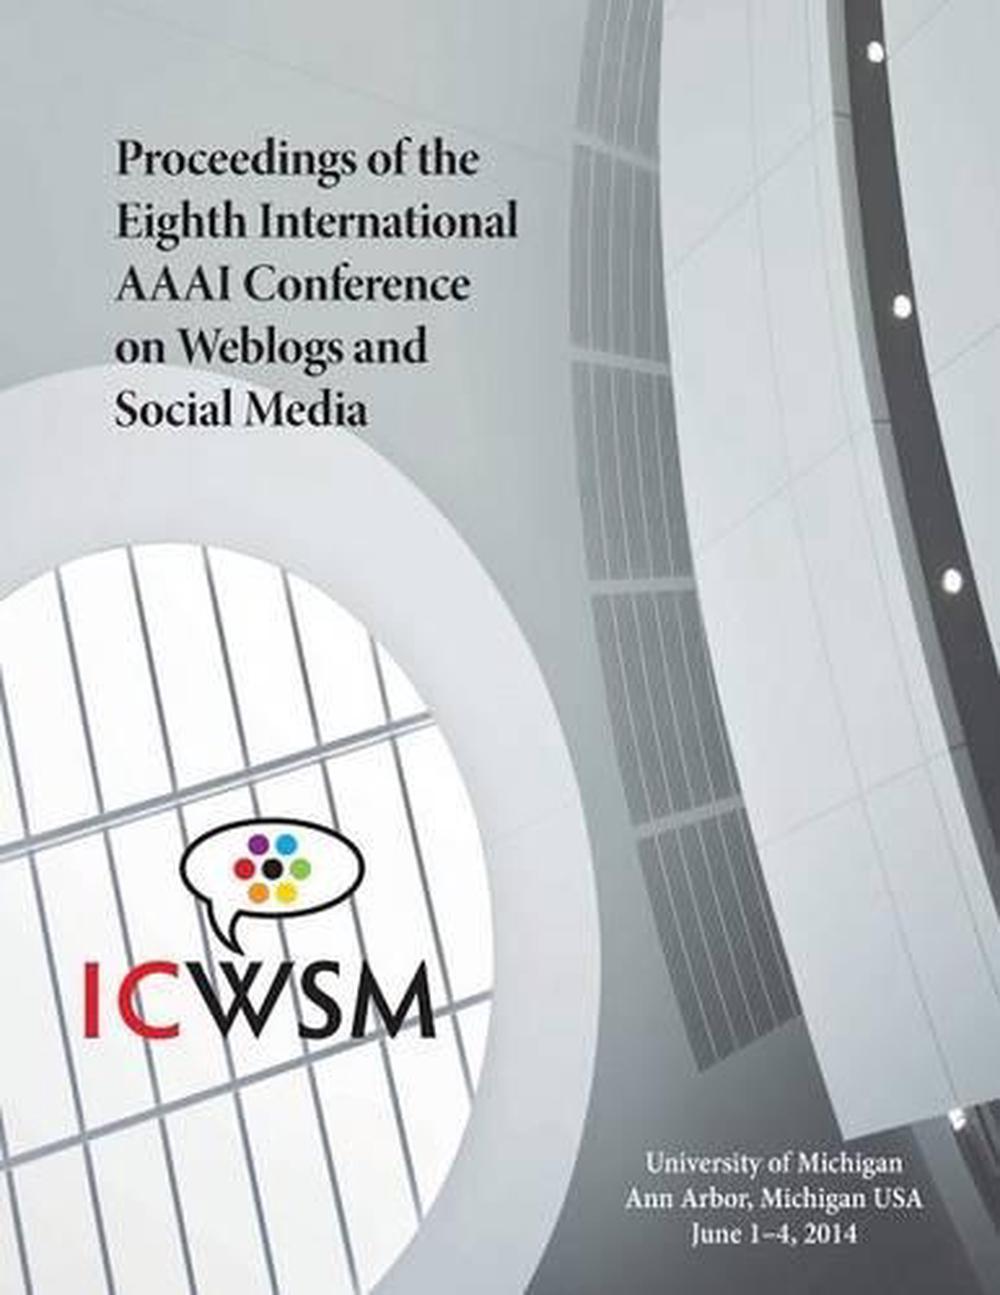 Proceedings of the Eighth International AAAI Conference on Weblogs and